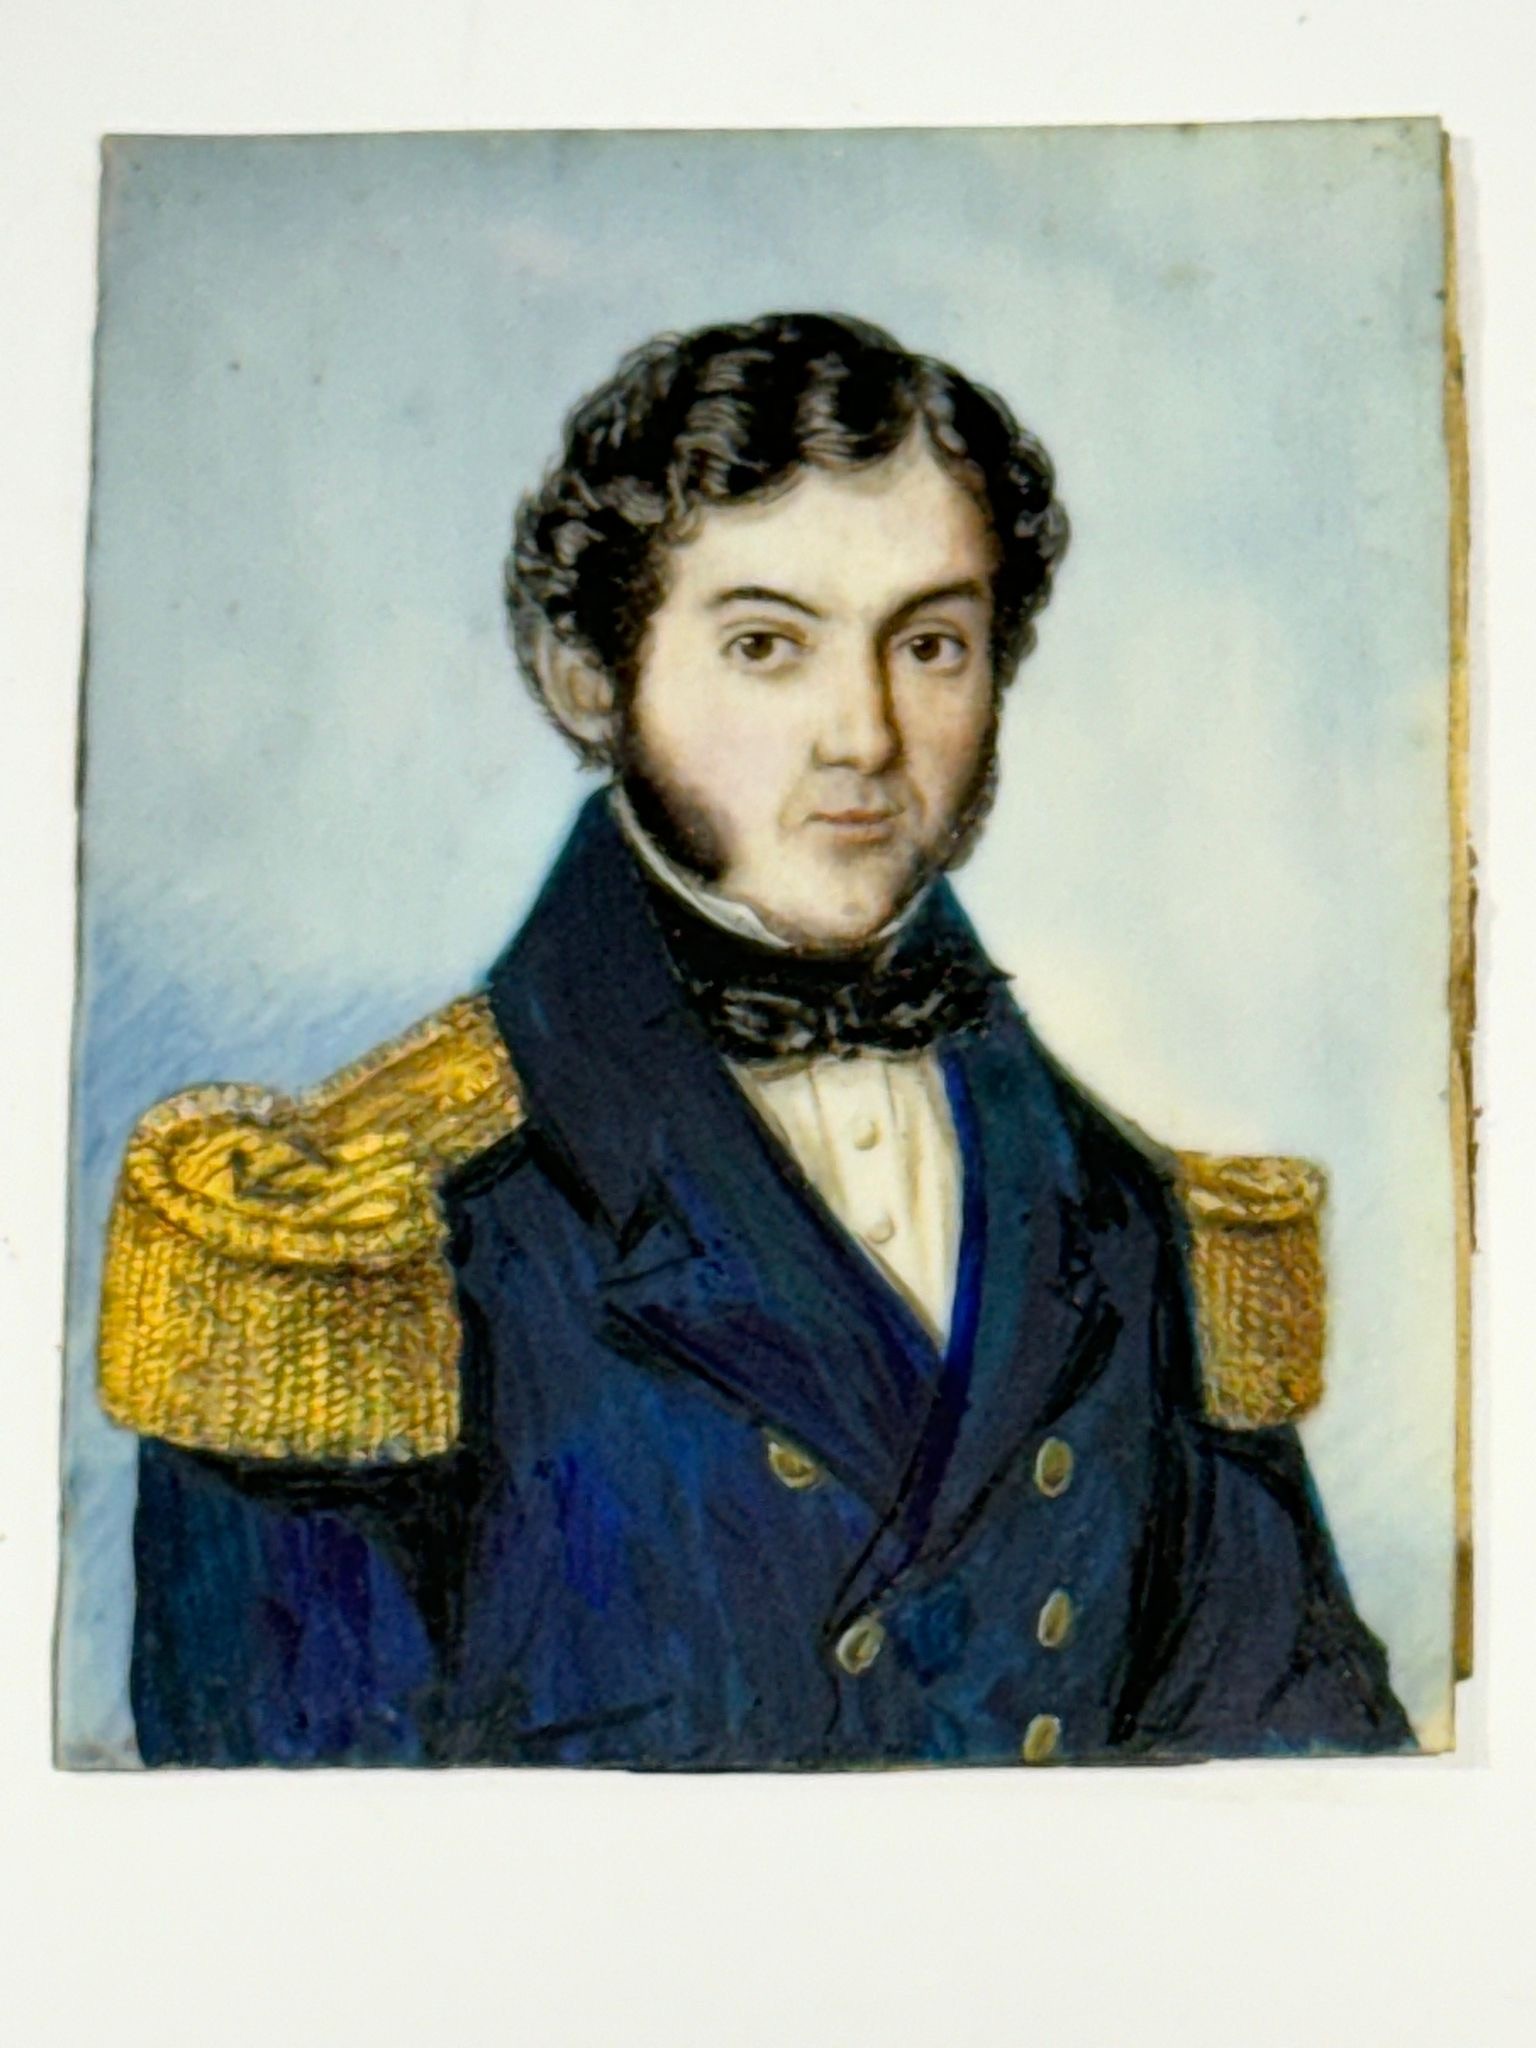 A Mid-19th century rectangular portrait miniature of a Naval Commander, with black curly hair and - Image 2 of 2